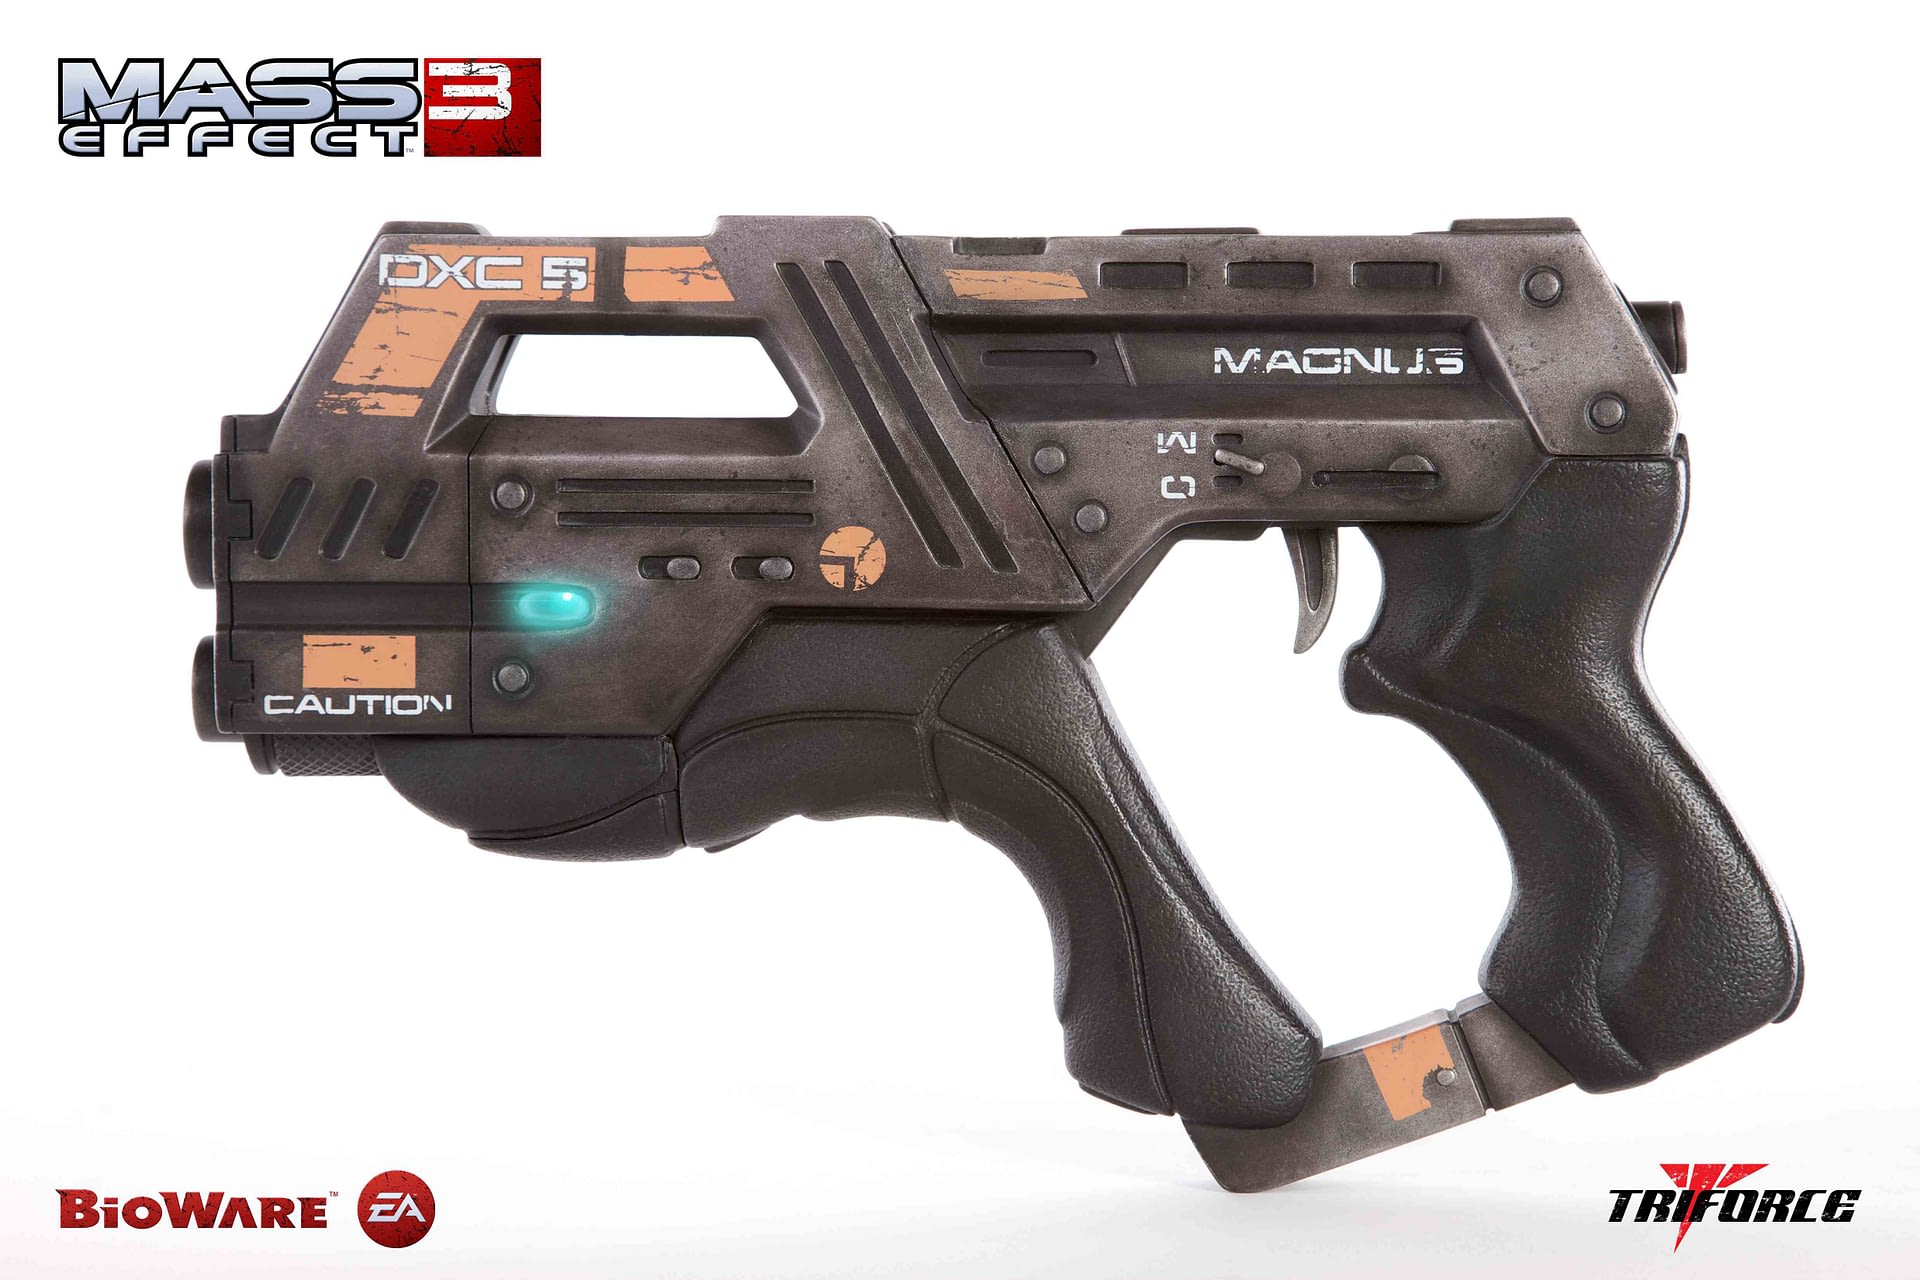 Triforce Makes At Scale Replicas Of Three Mass Effect Weapons Gamezone